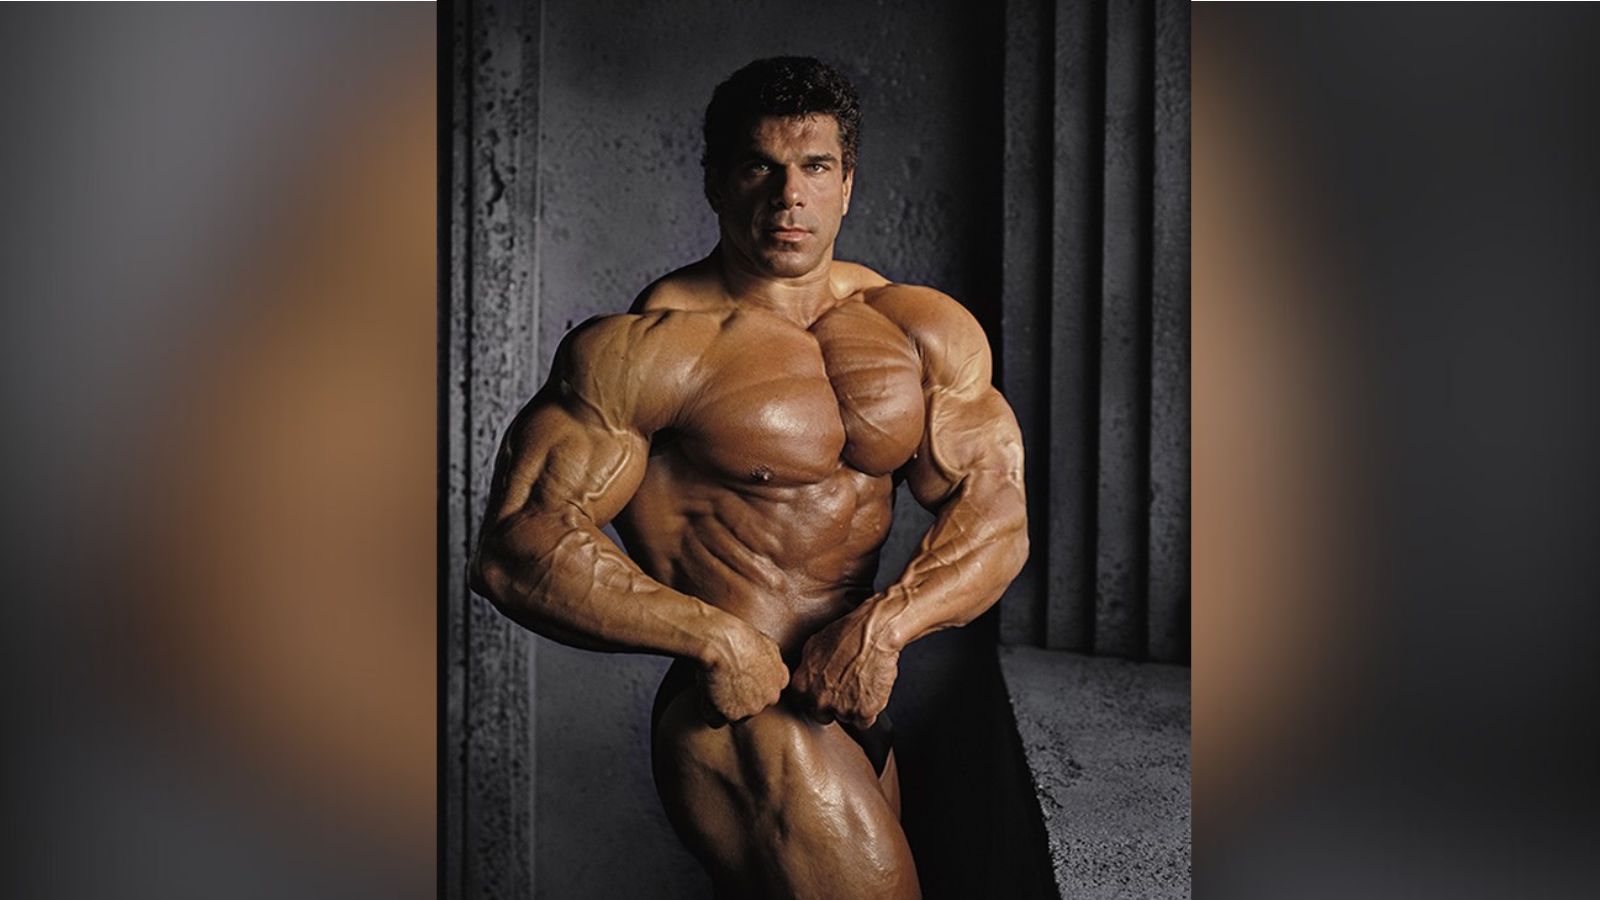 Free Photos - A Muscular Man With Bulging Muscles, Posing For The Camera.  He Appears To Be Very Strong And Defined, Showcasing His Impressive  Physique. | FreePixel.com